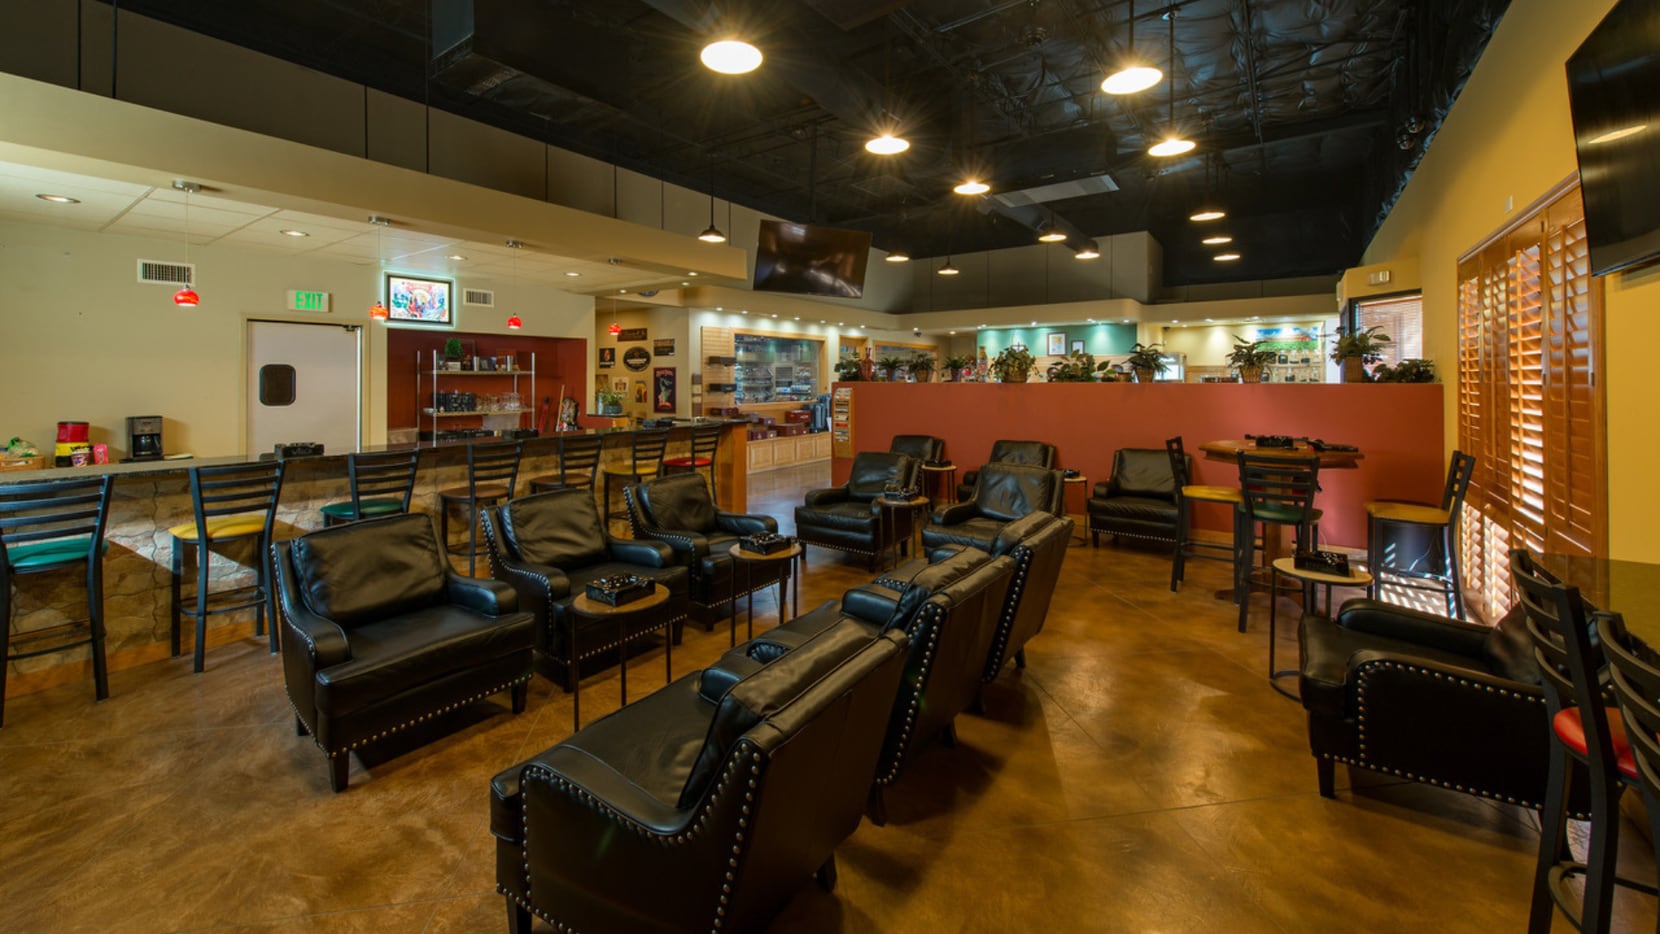 Customers can find Renegade Cigars' 4,000 square-foot lounge just off Central Expressway in Richardson.